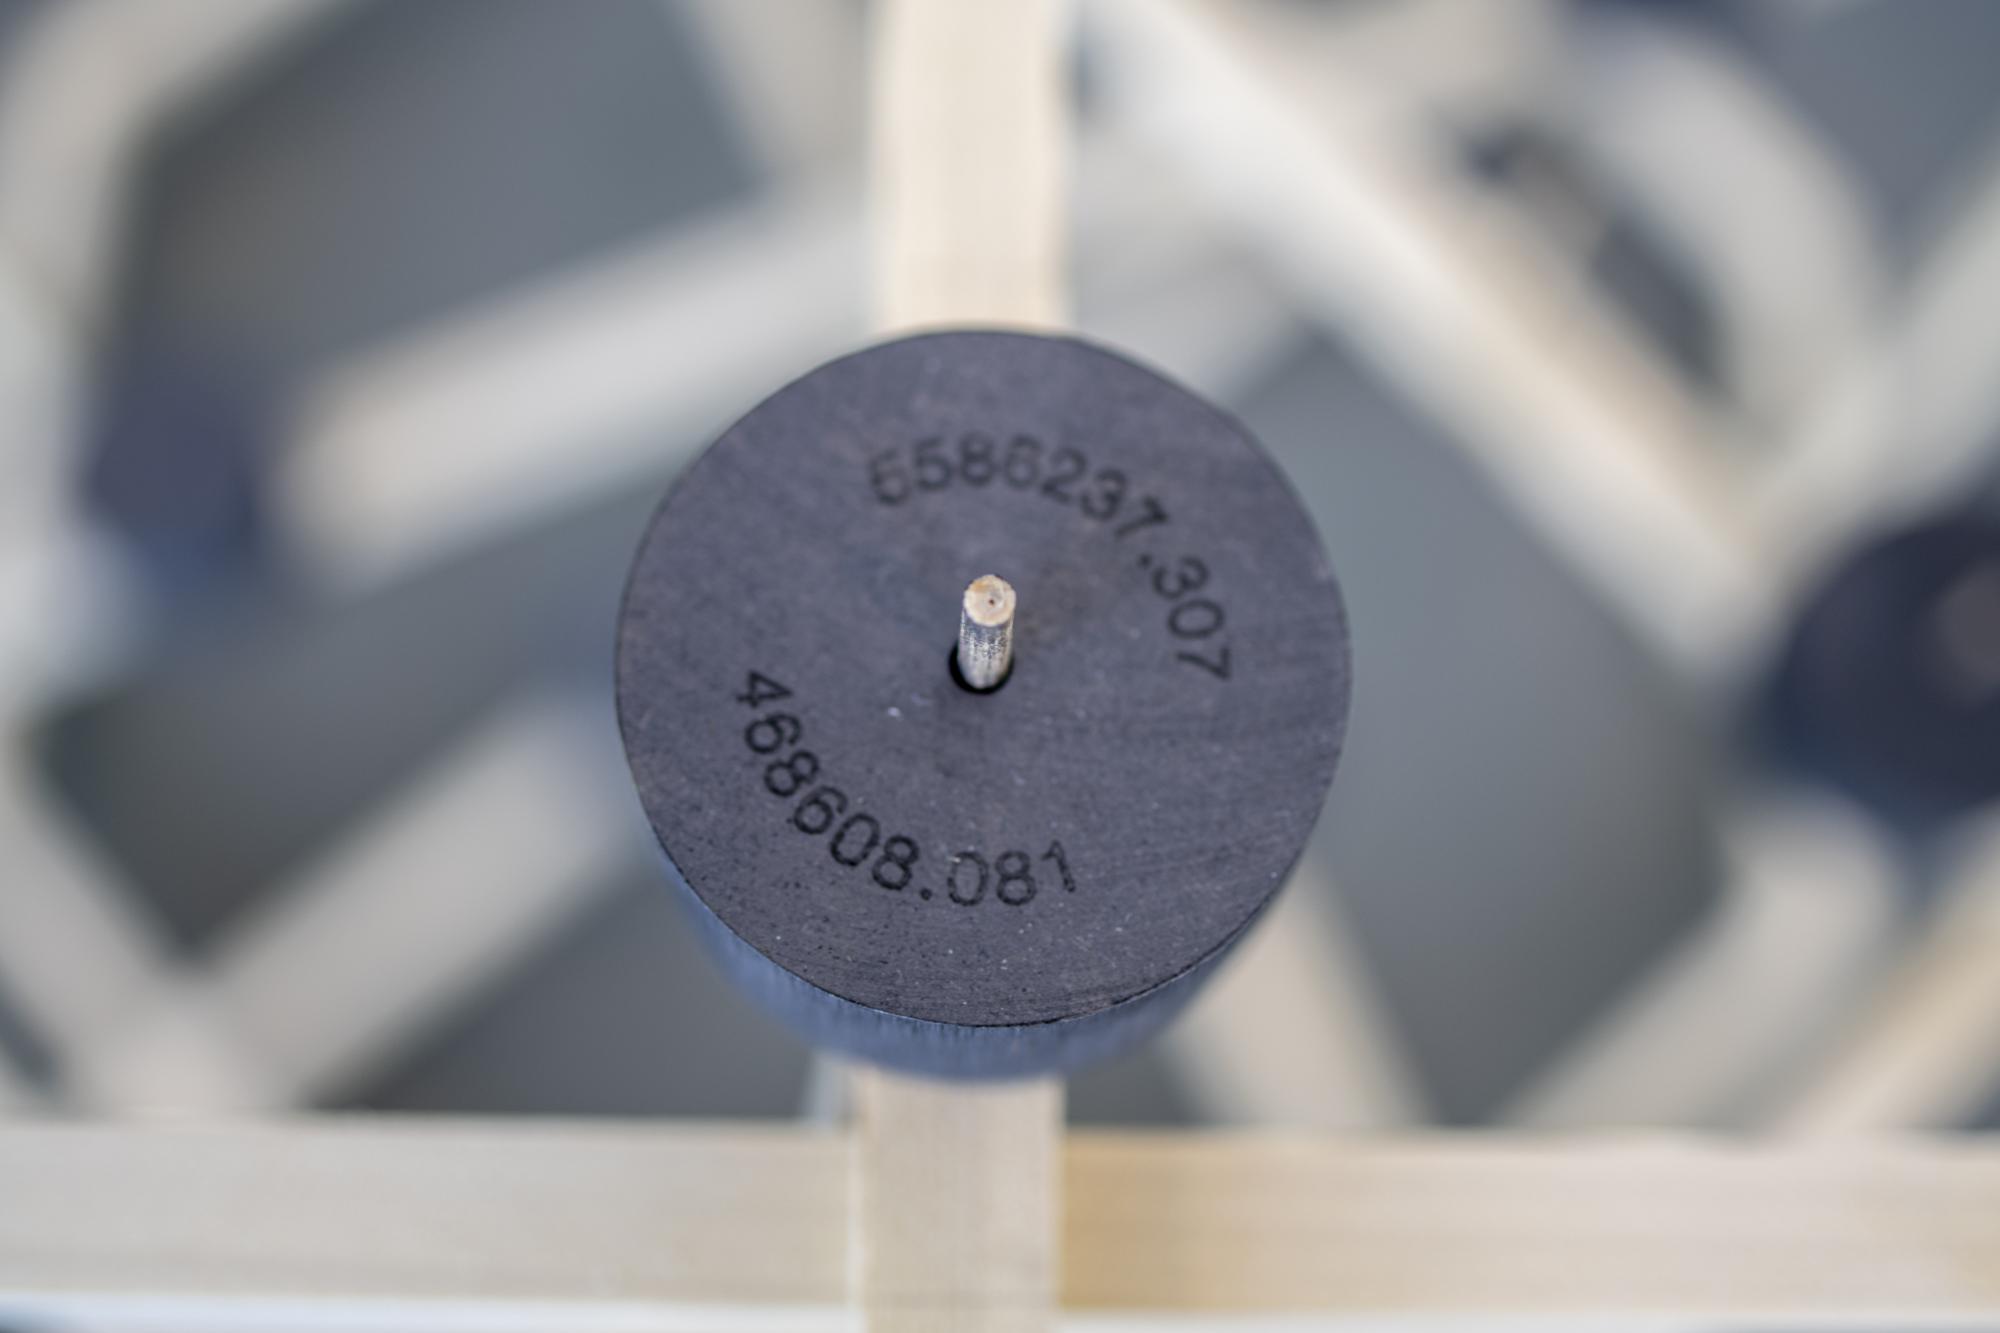 A close-up view of a round graphite block on a wooden structure composed of interlocking sticks. Engraved on the graphite block are latitudinal and longitudinal coordinates that identify the location of a site of difficult history.